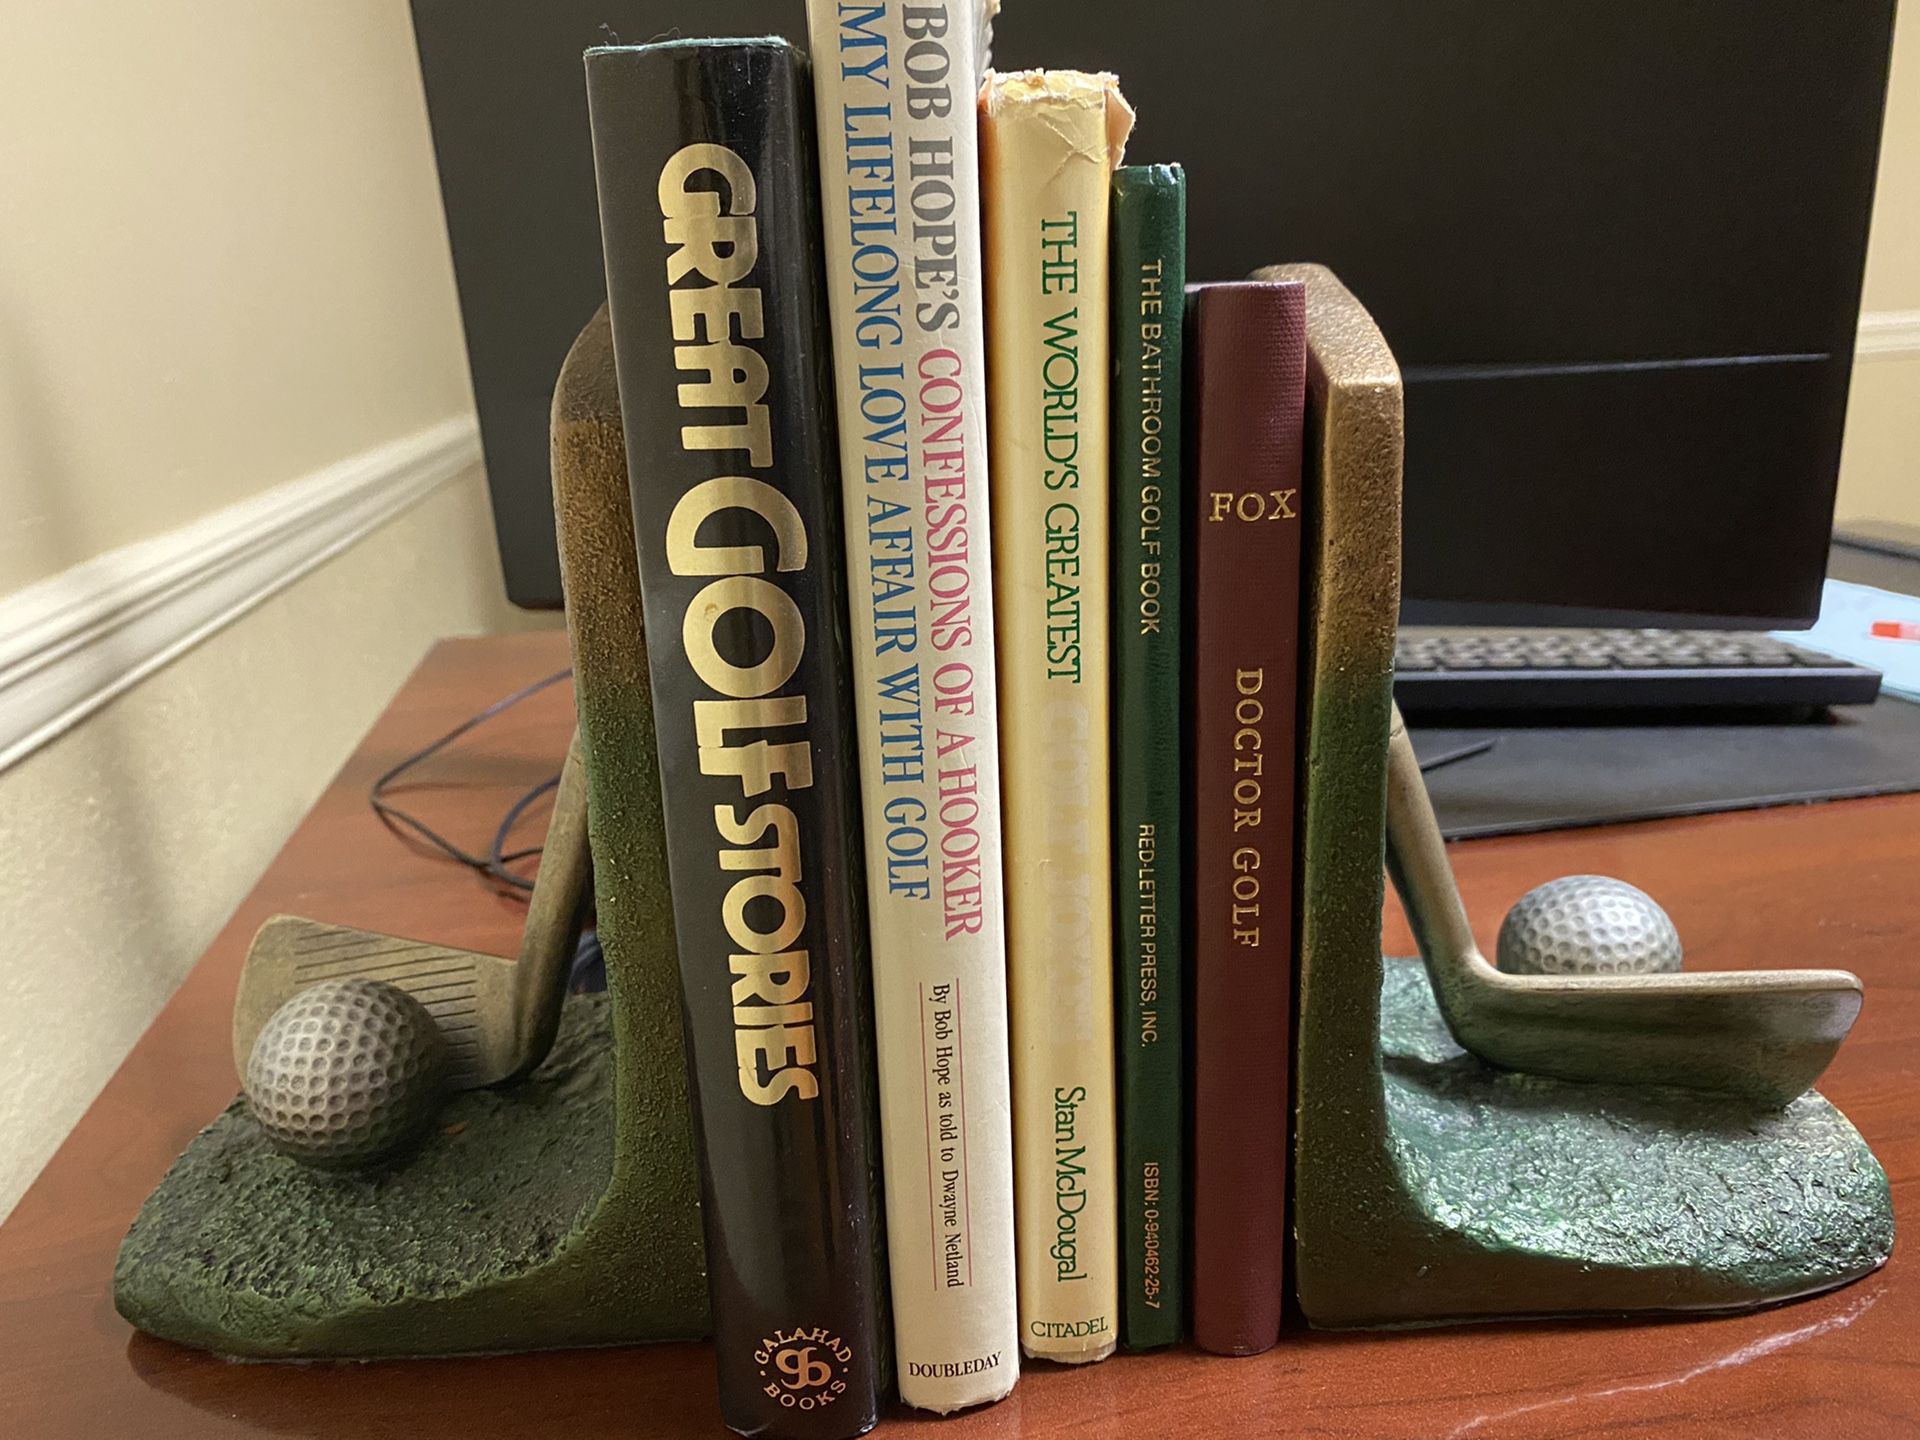 FREE golf books with golf bookends.